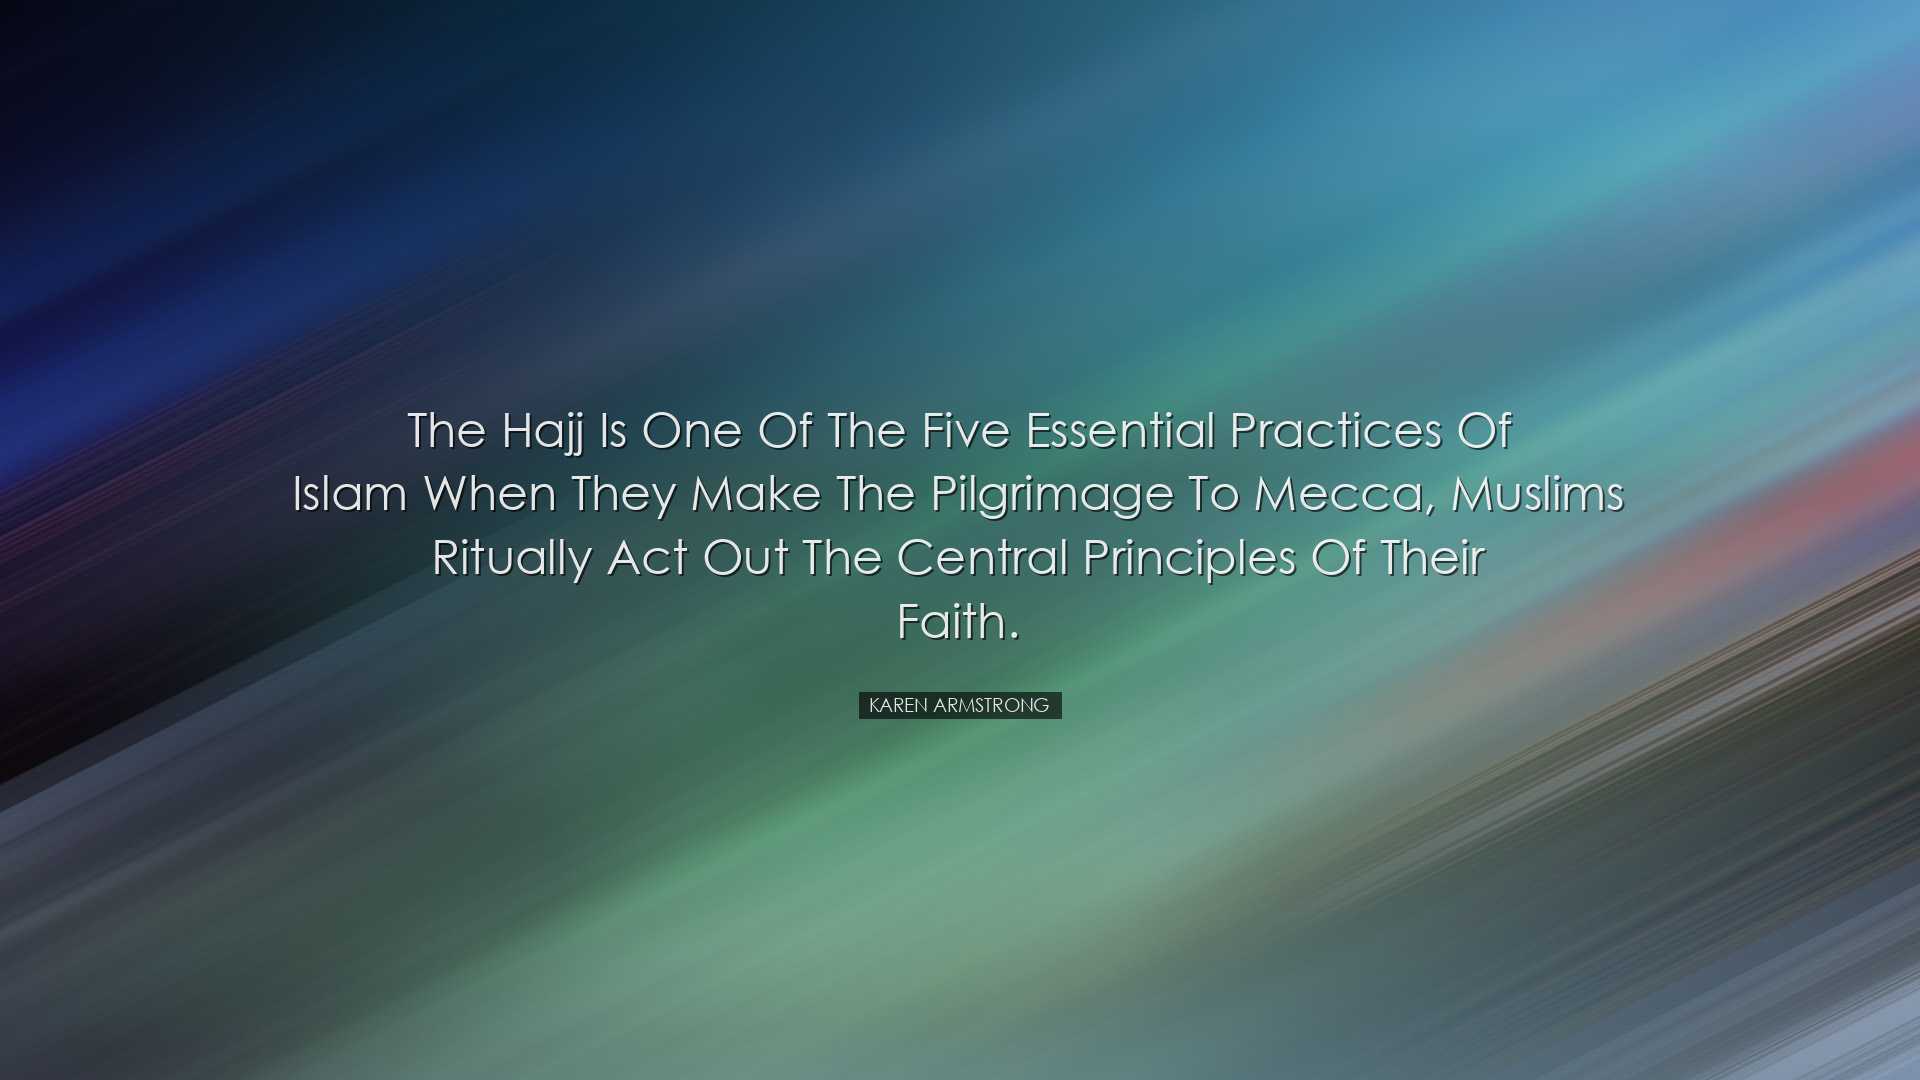 The hajj is one of the five essential practices of Islam when they